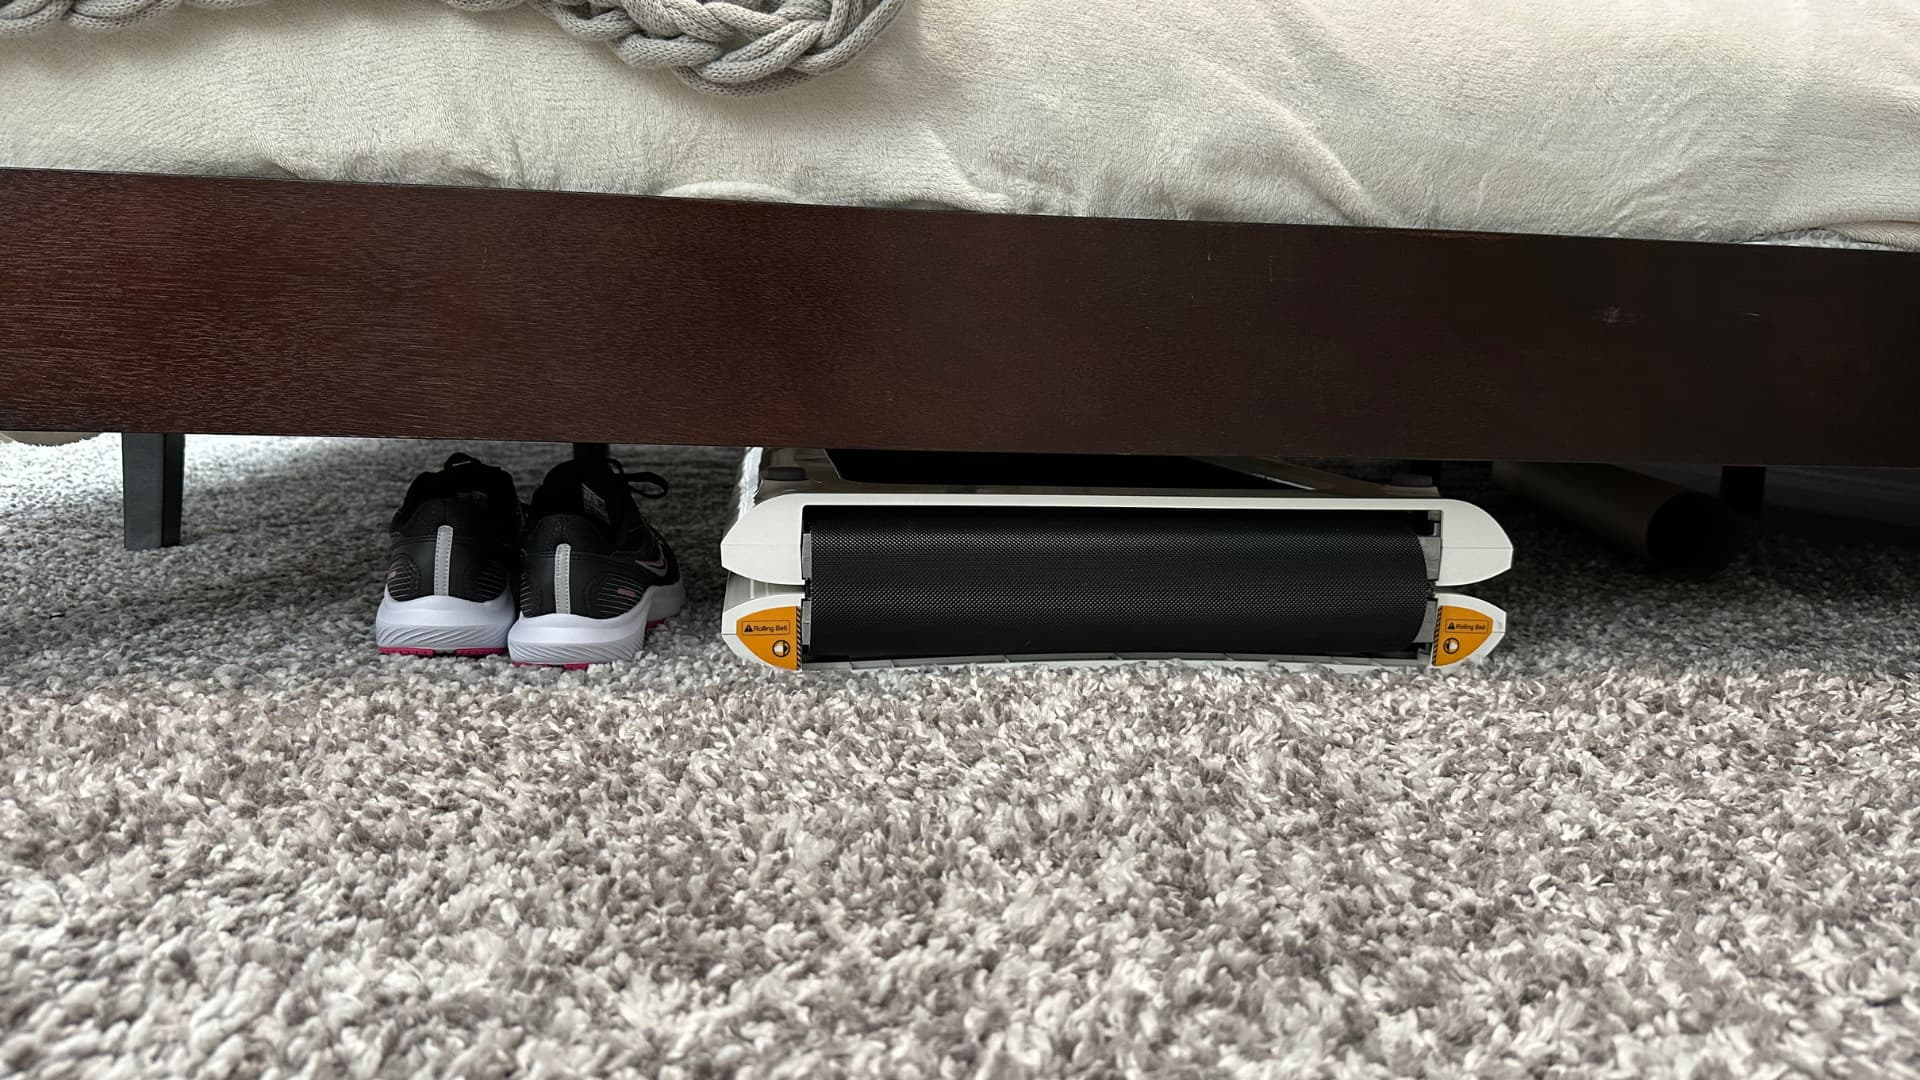 Low profile when folded allows me to tuck it neatly under my bed